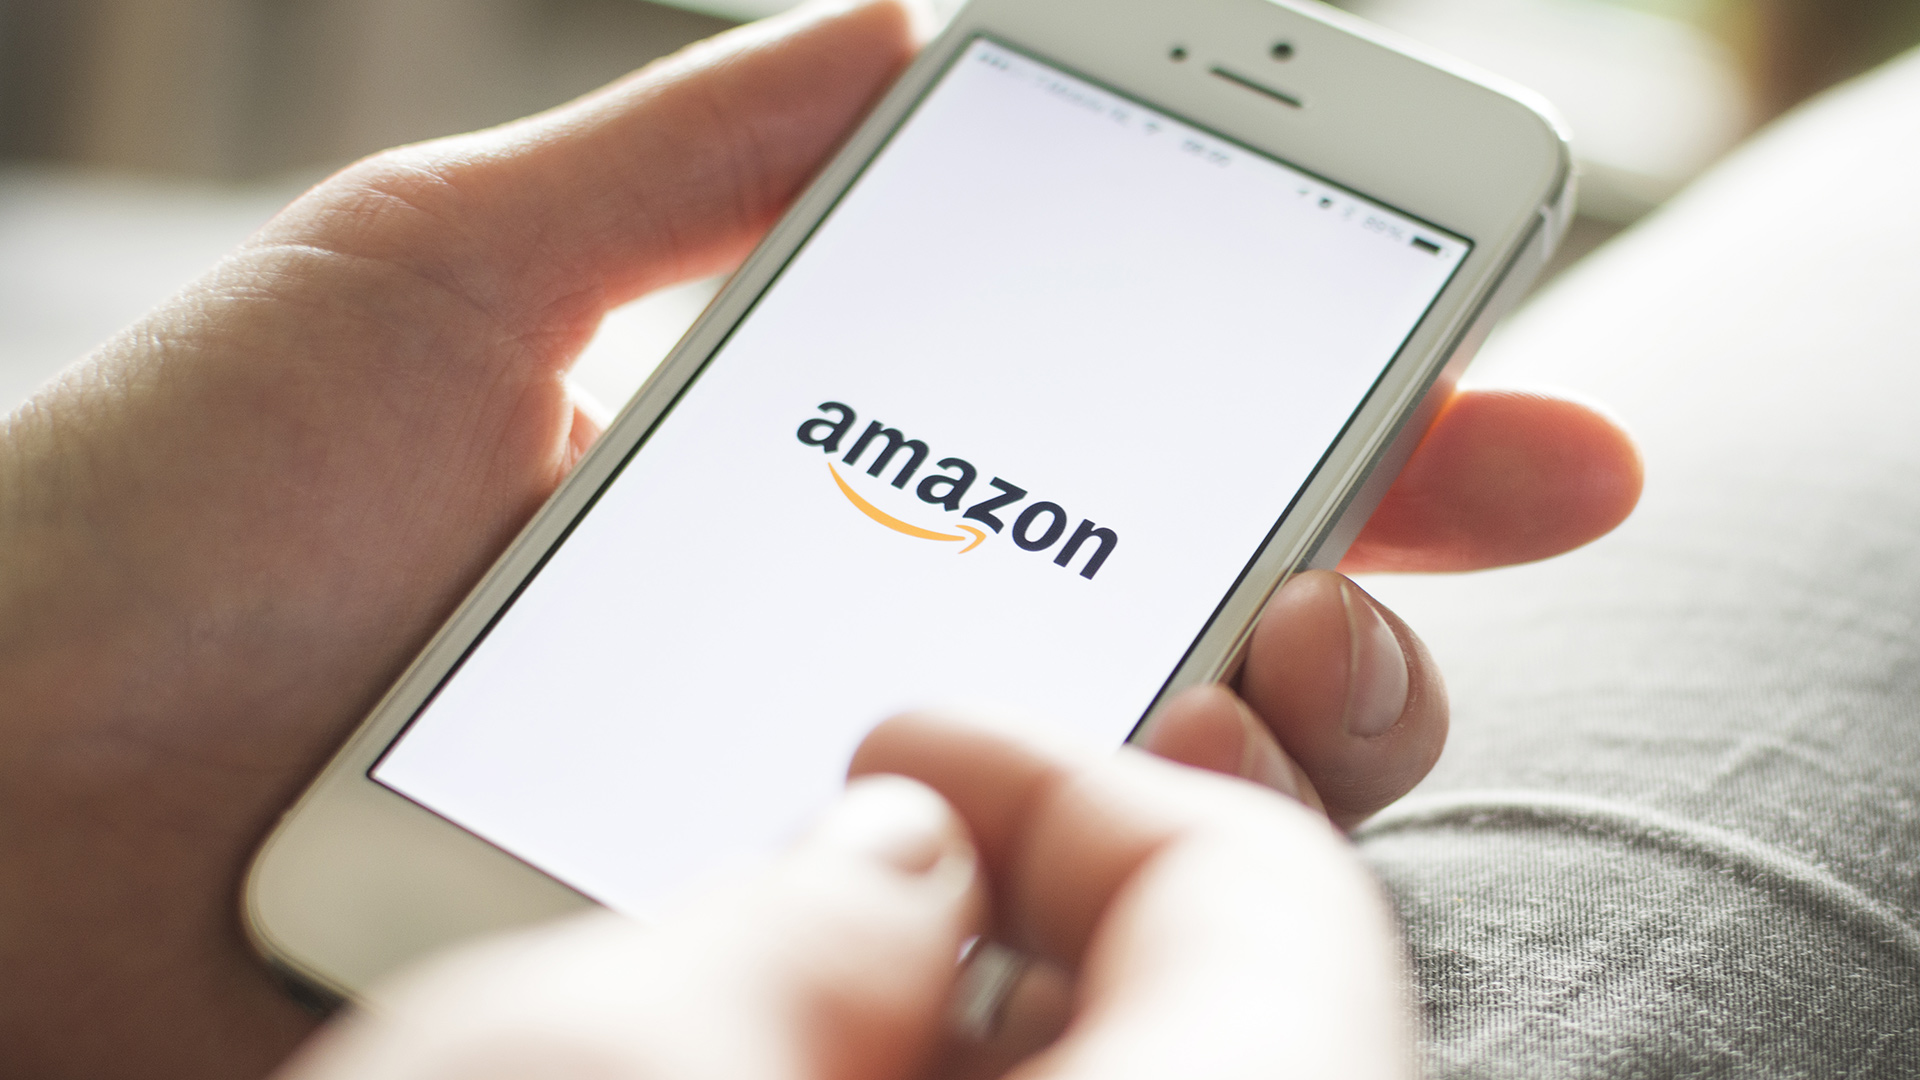 Amazon’s December email campaigns outperform competitors, earning nearly 20% read rate